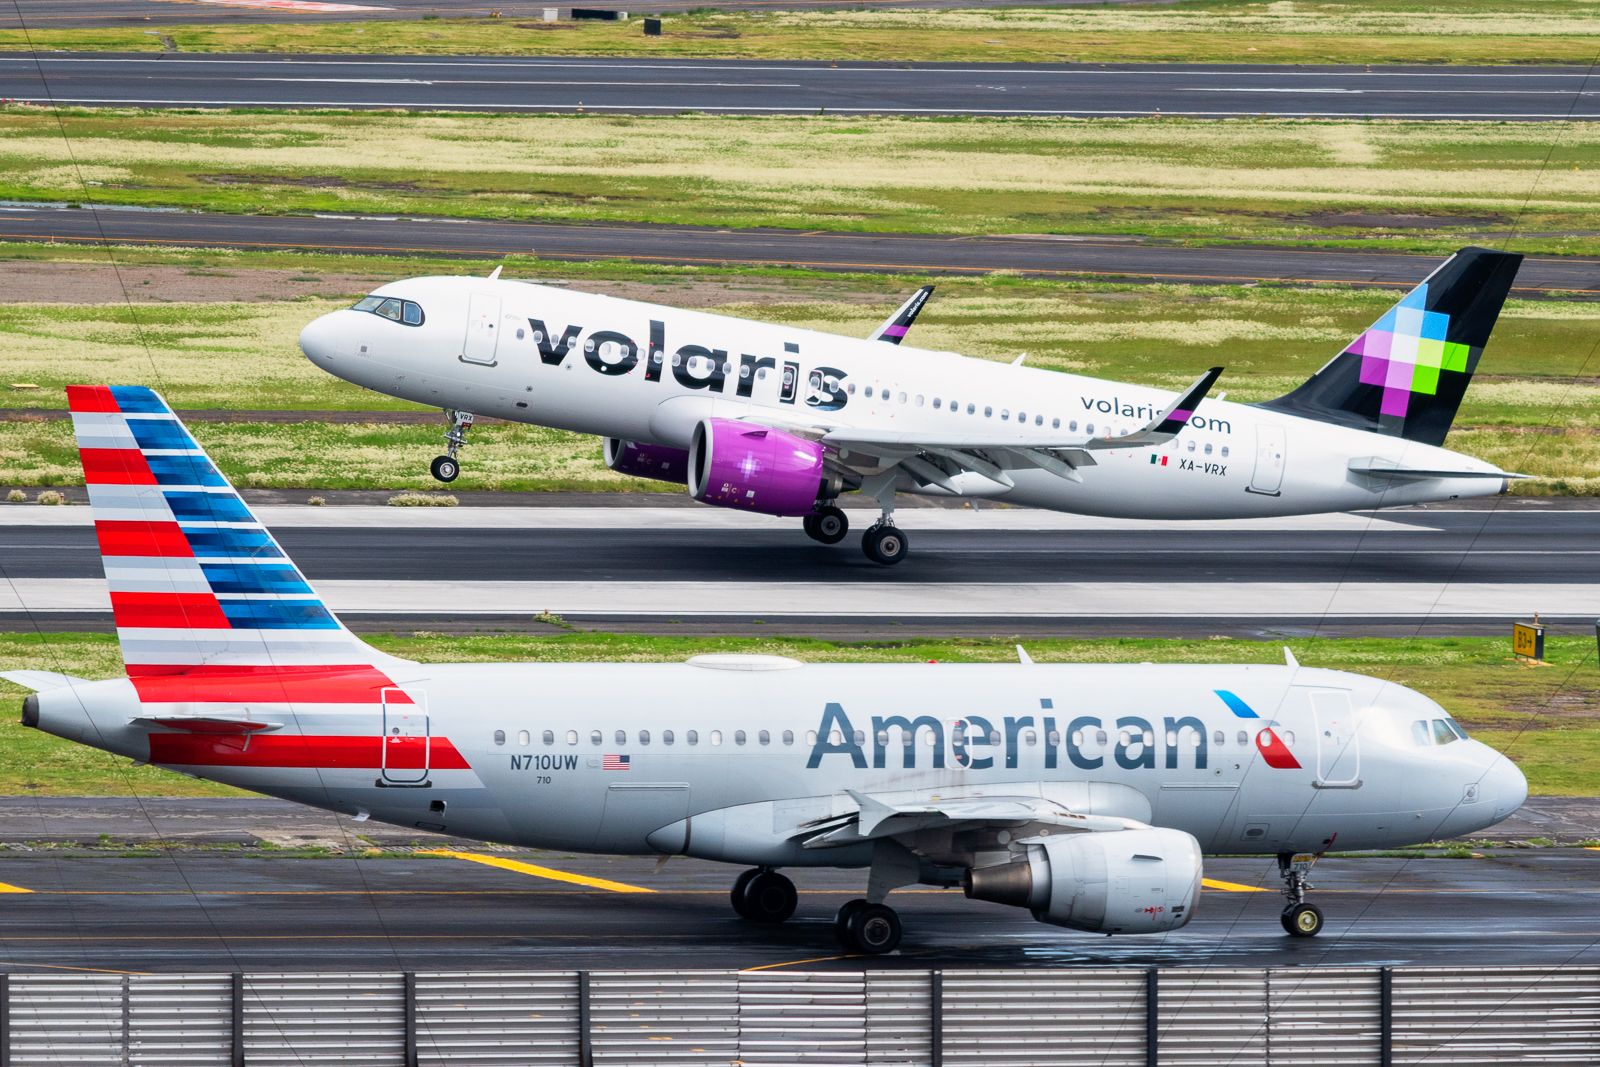 An American Airlines Airbus A319 in the front and a Volaris aircraft departing in the back in Mexico City. 